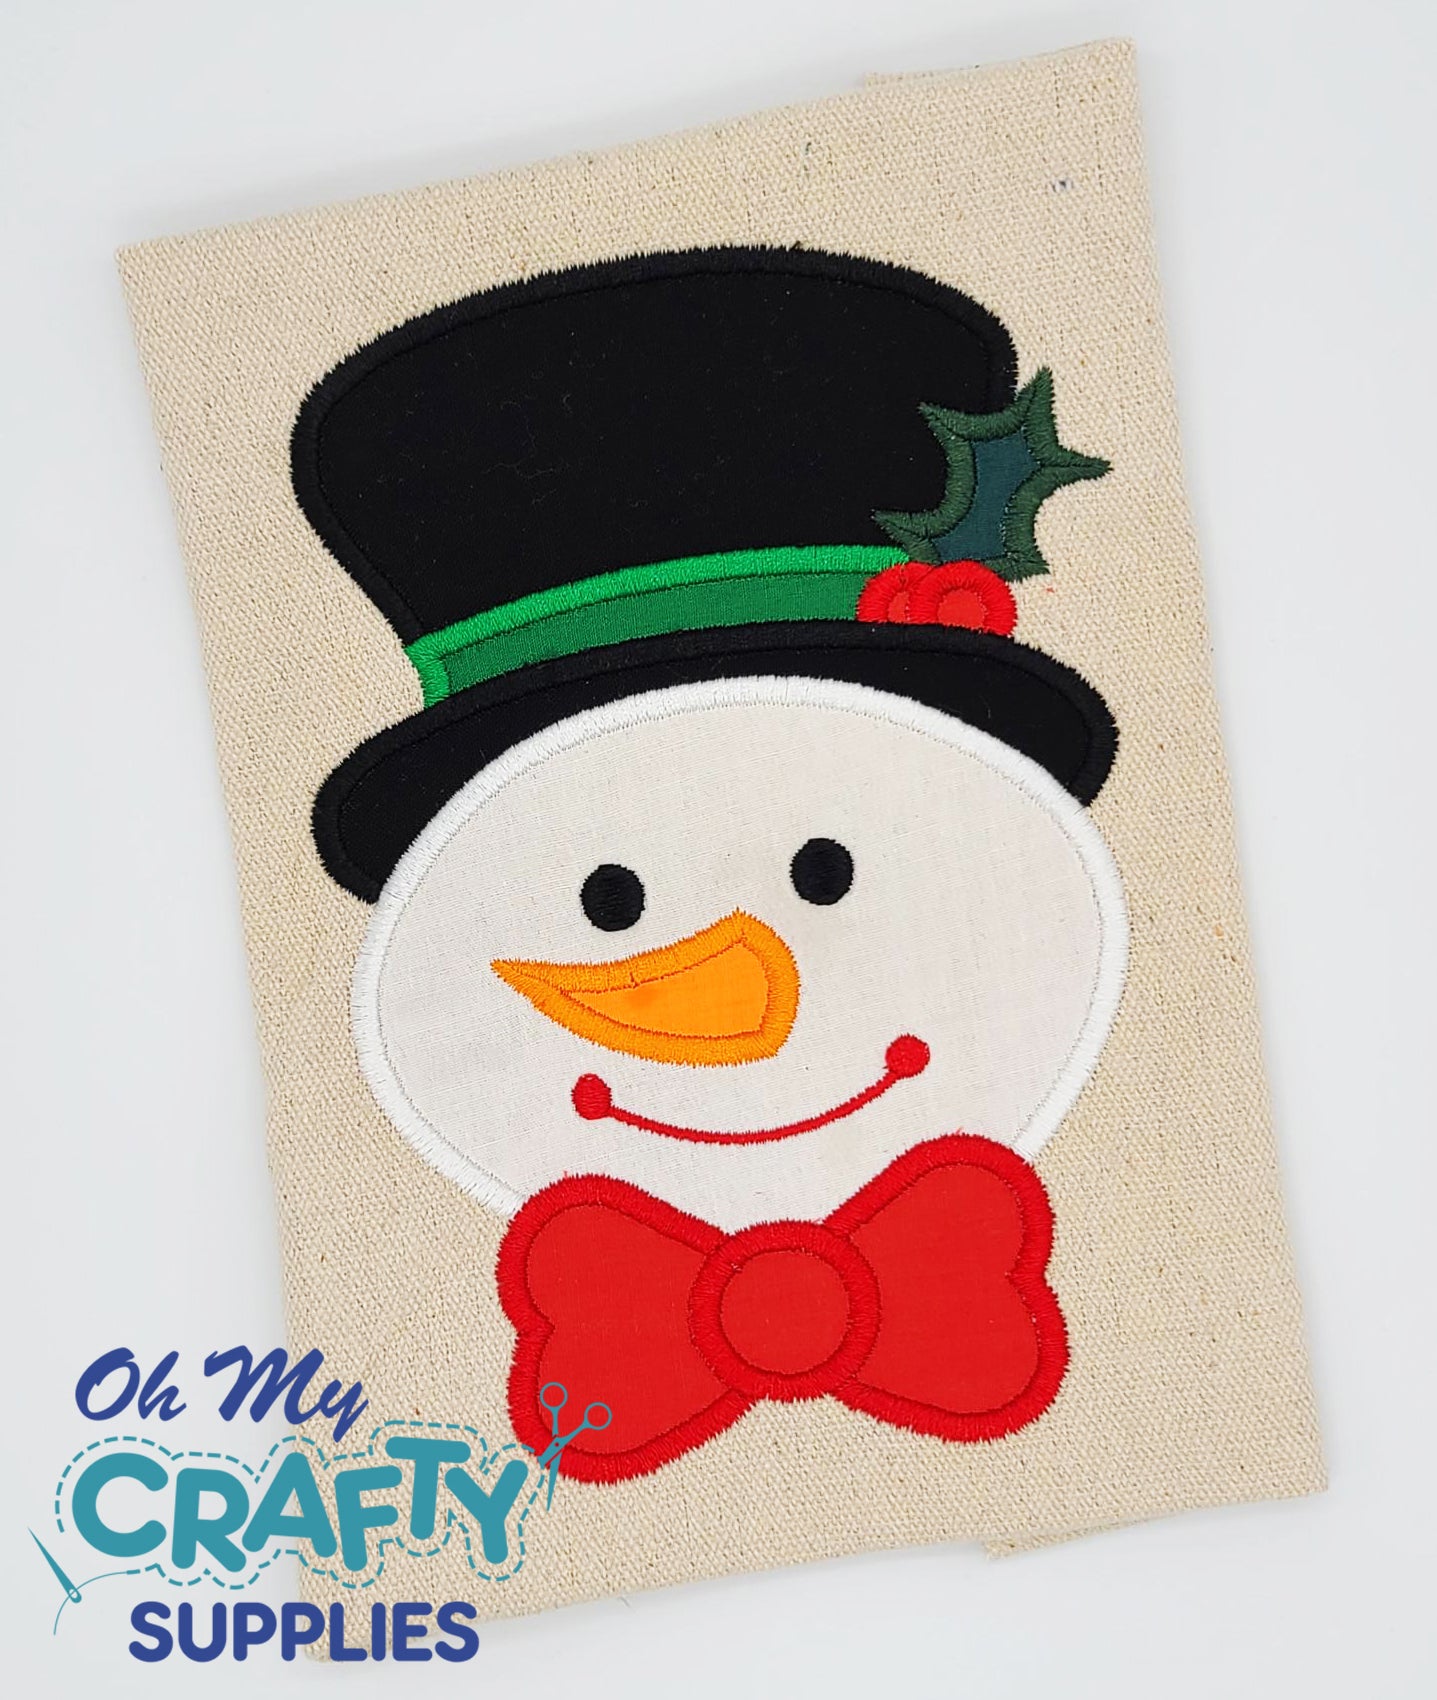 Top Hat Snowman Embroidery Design – Oh My Crafty Supplies Inc.